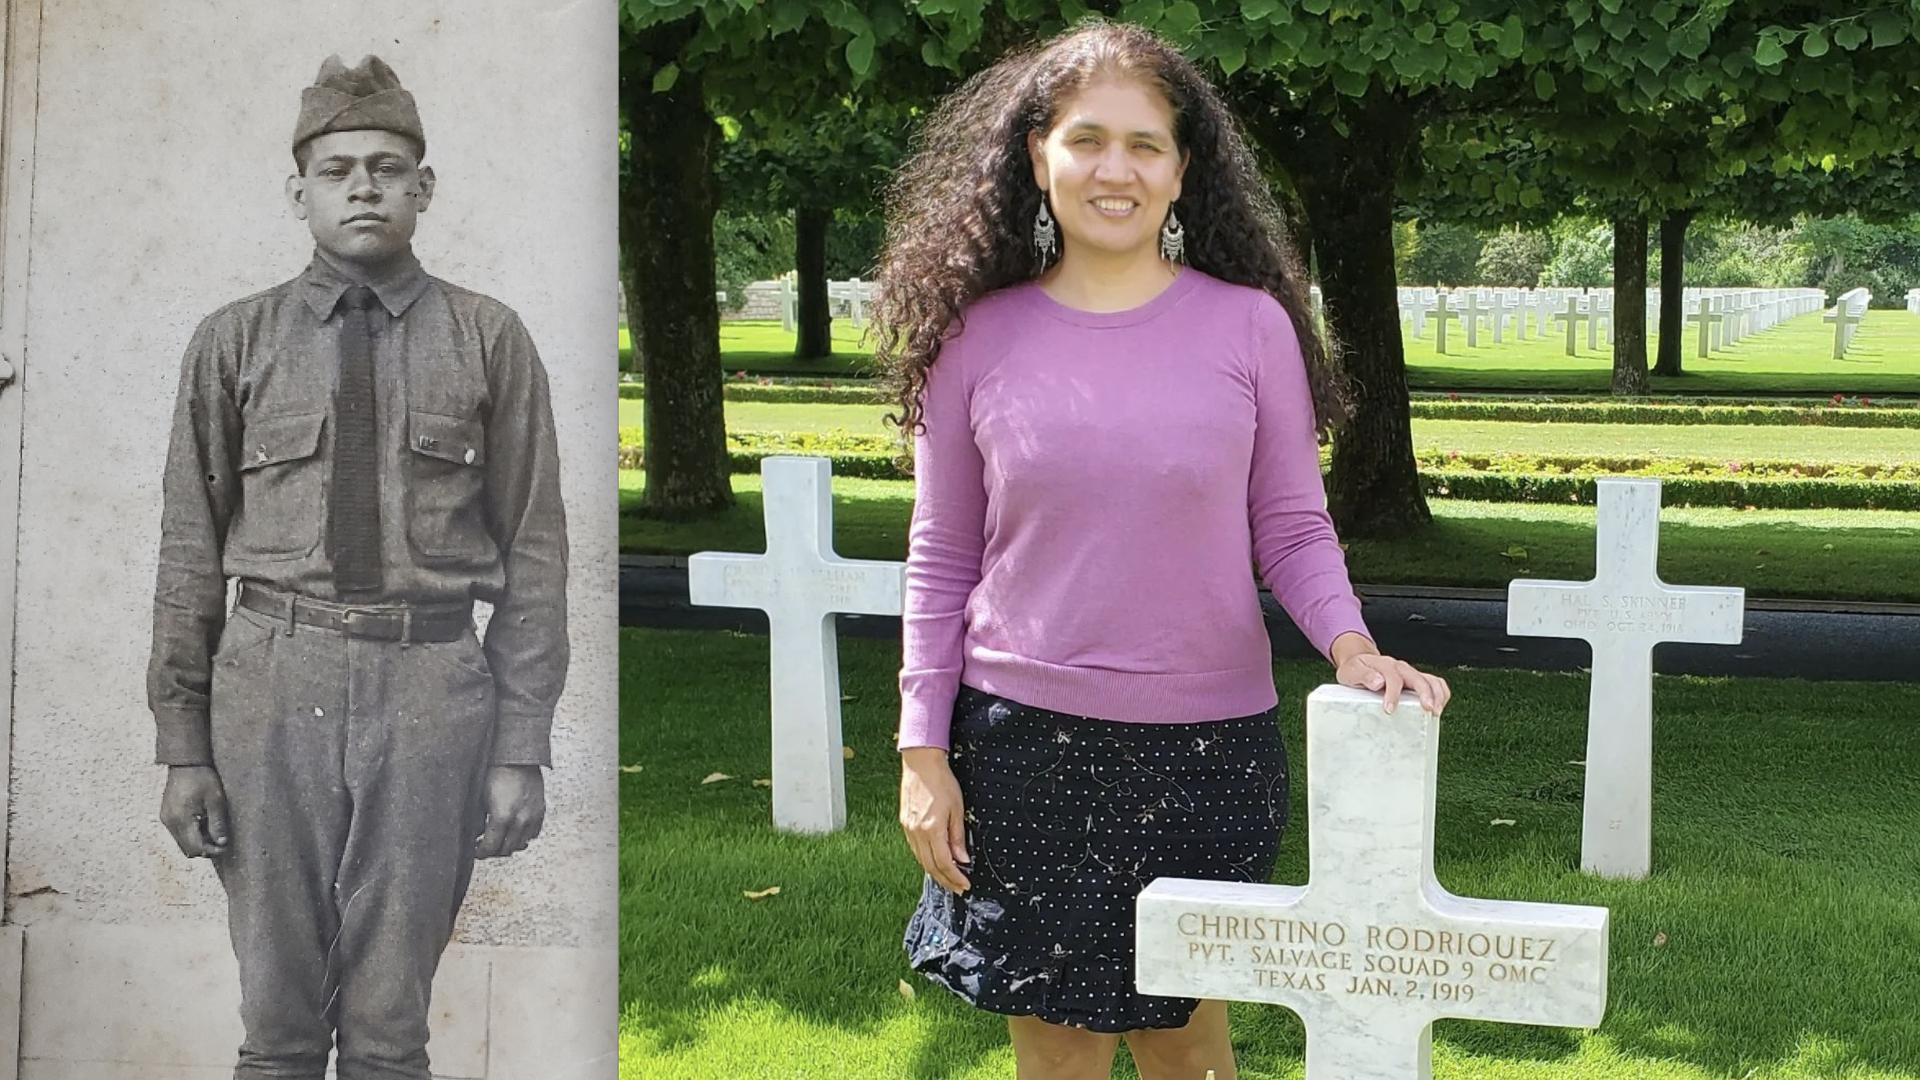 Crispin Rodriguez, a Mexican American soldier who died while serving in the U.S. Army during WWI, and his great great grand niece, Lisa Ramos, at his resting place in the cemetery in Thiaucourt-Regniéville, France.